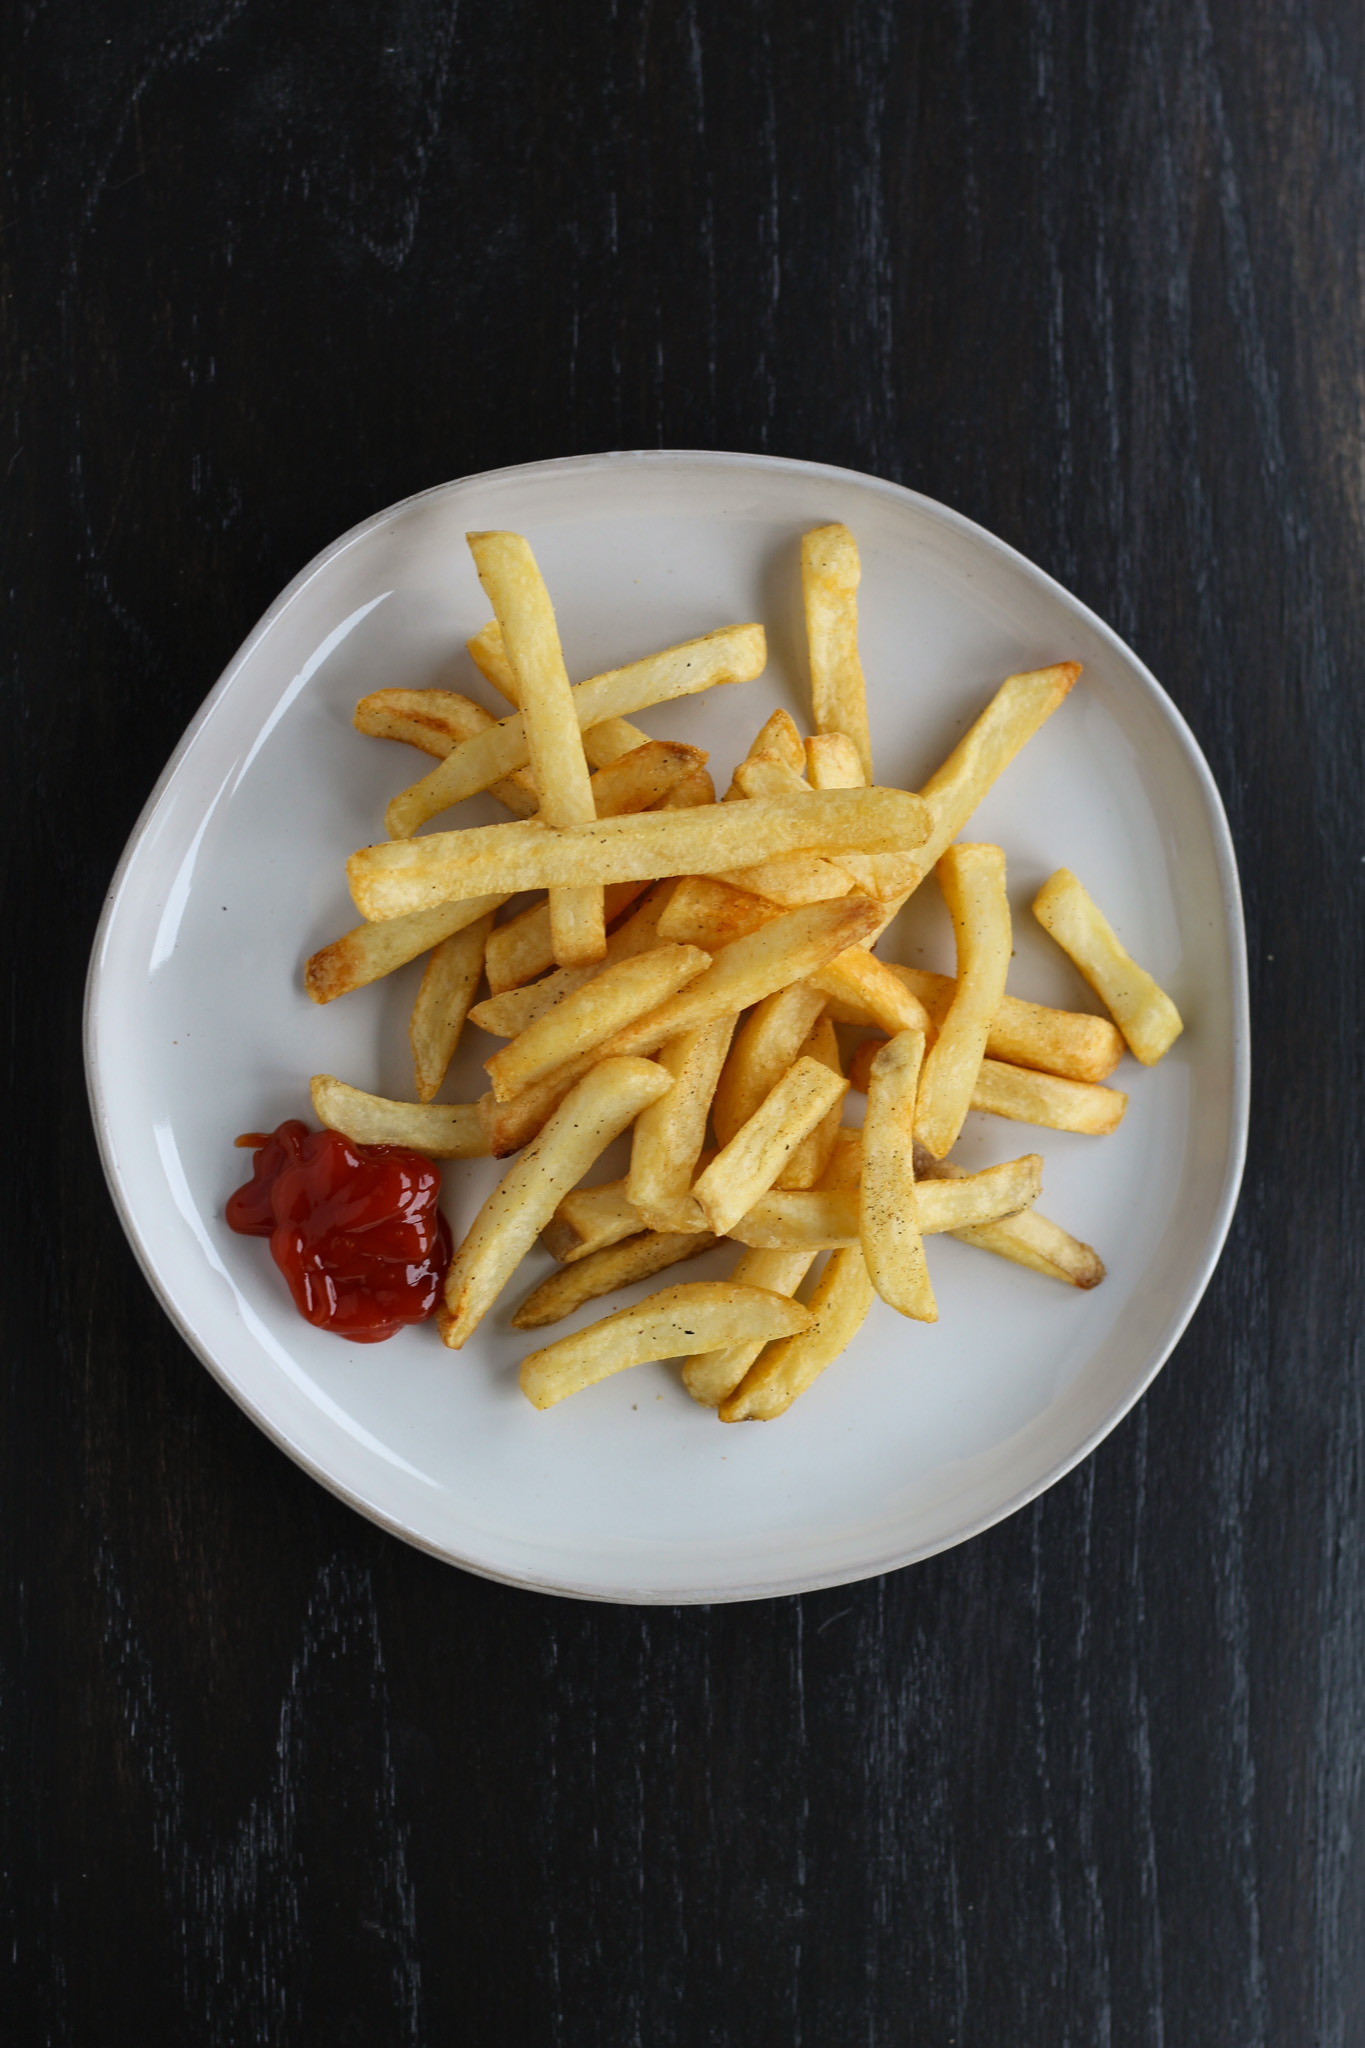 french fries on plate next to ketchup